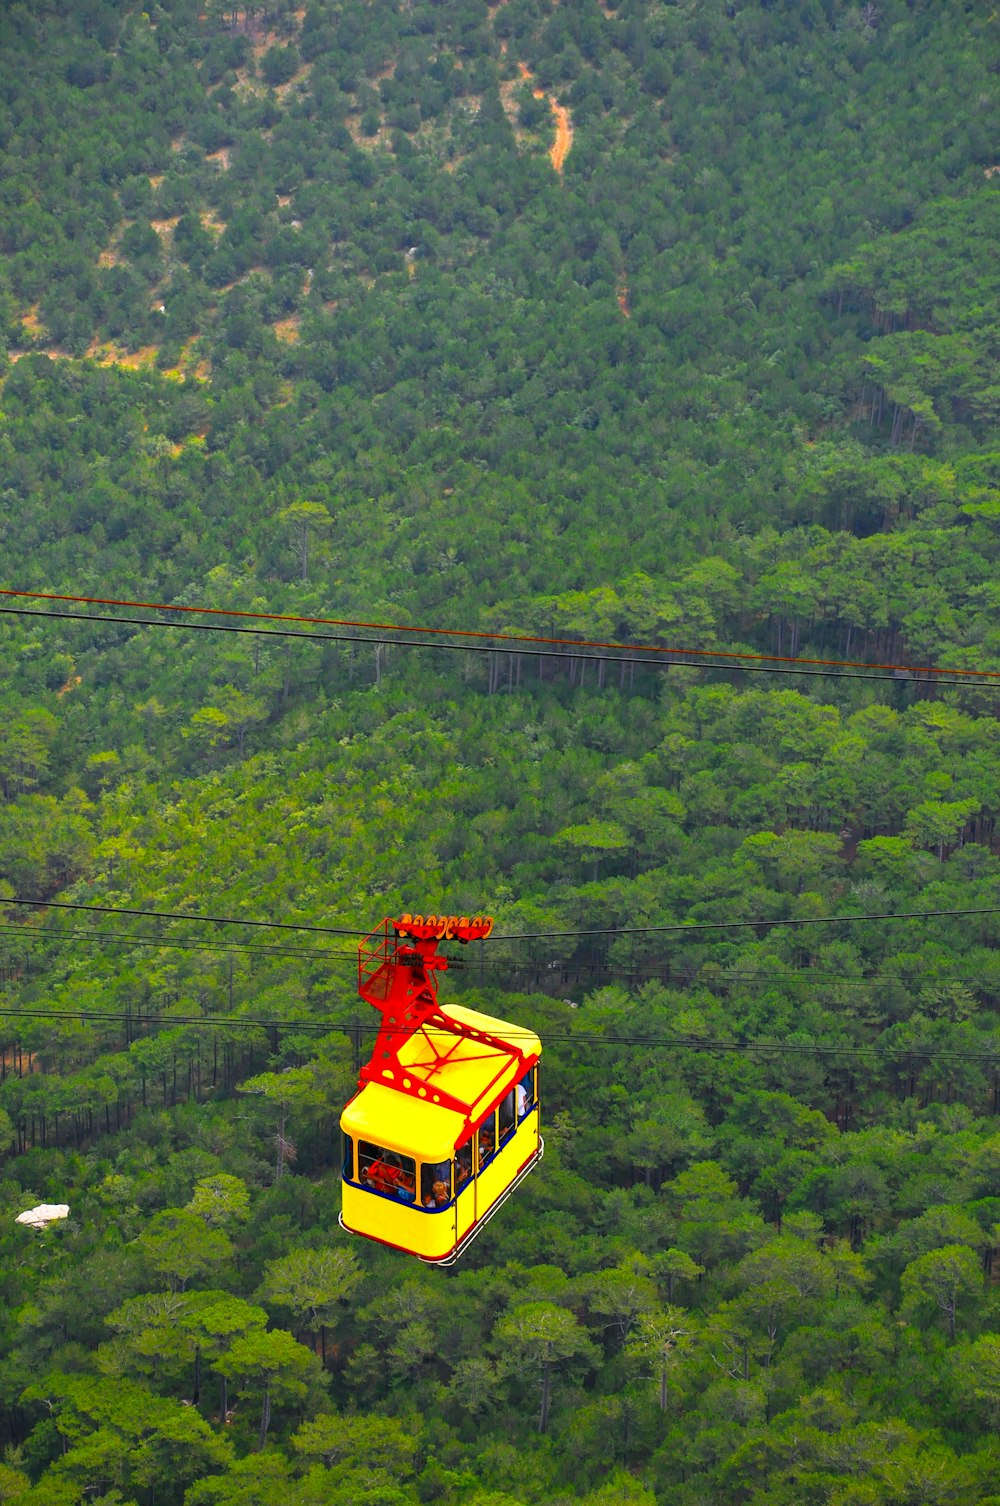 yellow cable car over green trees during daytime